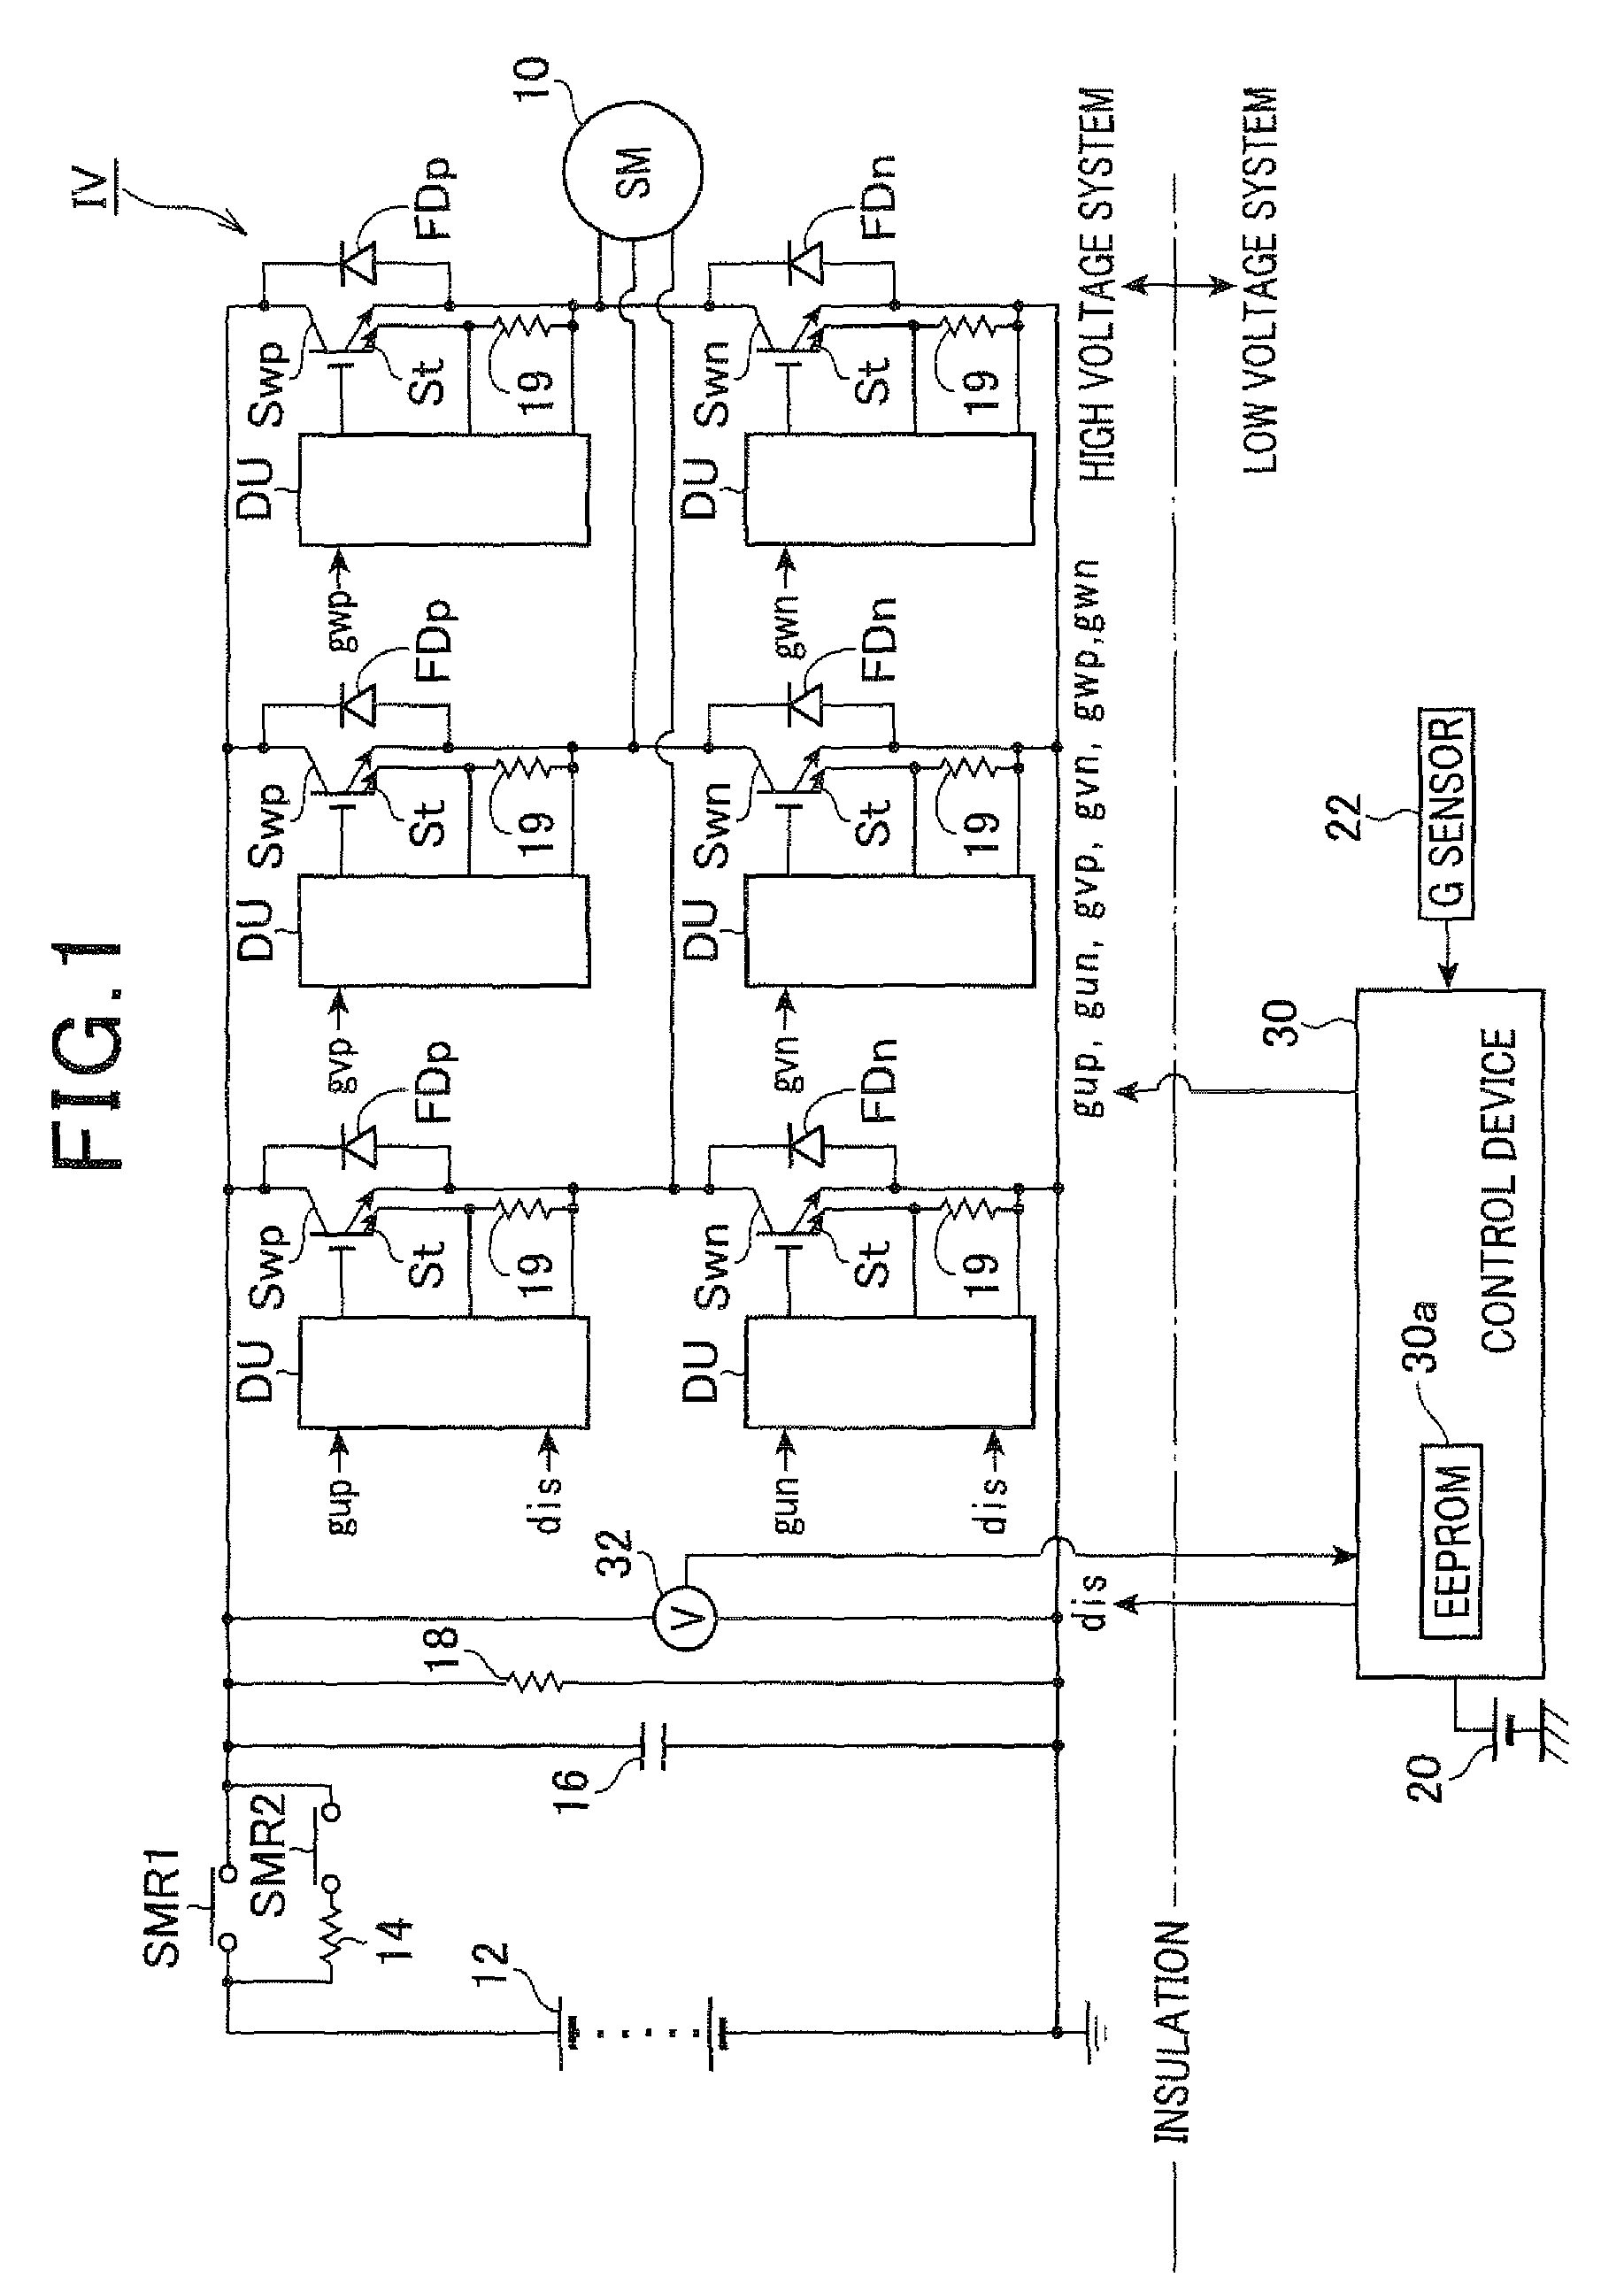 Discharging control device for electric power conversion system